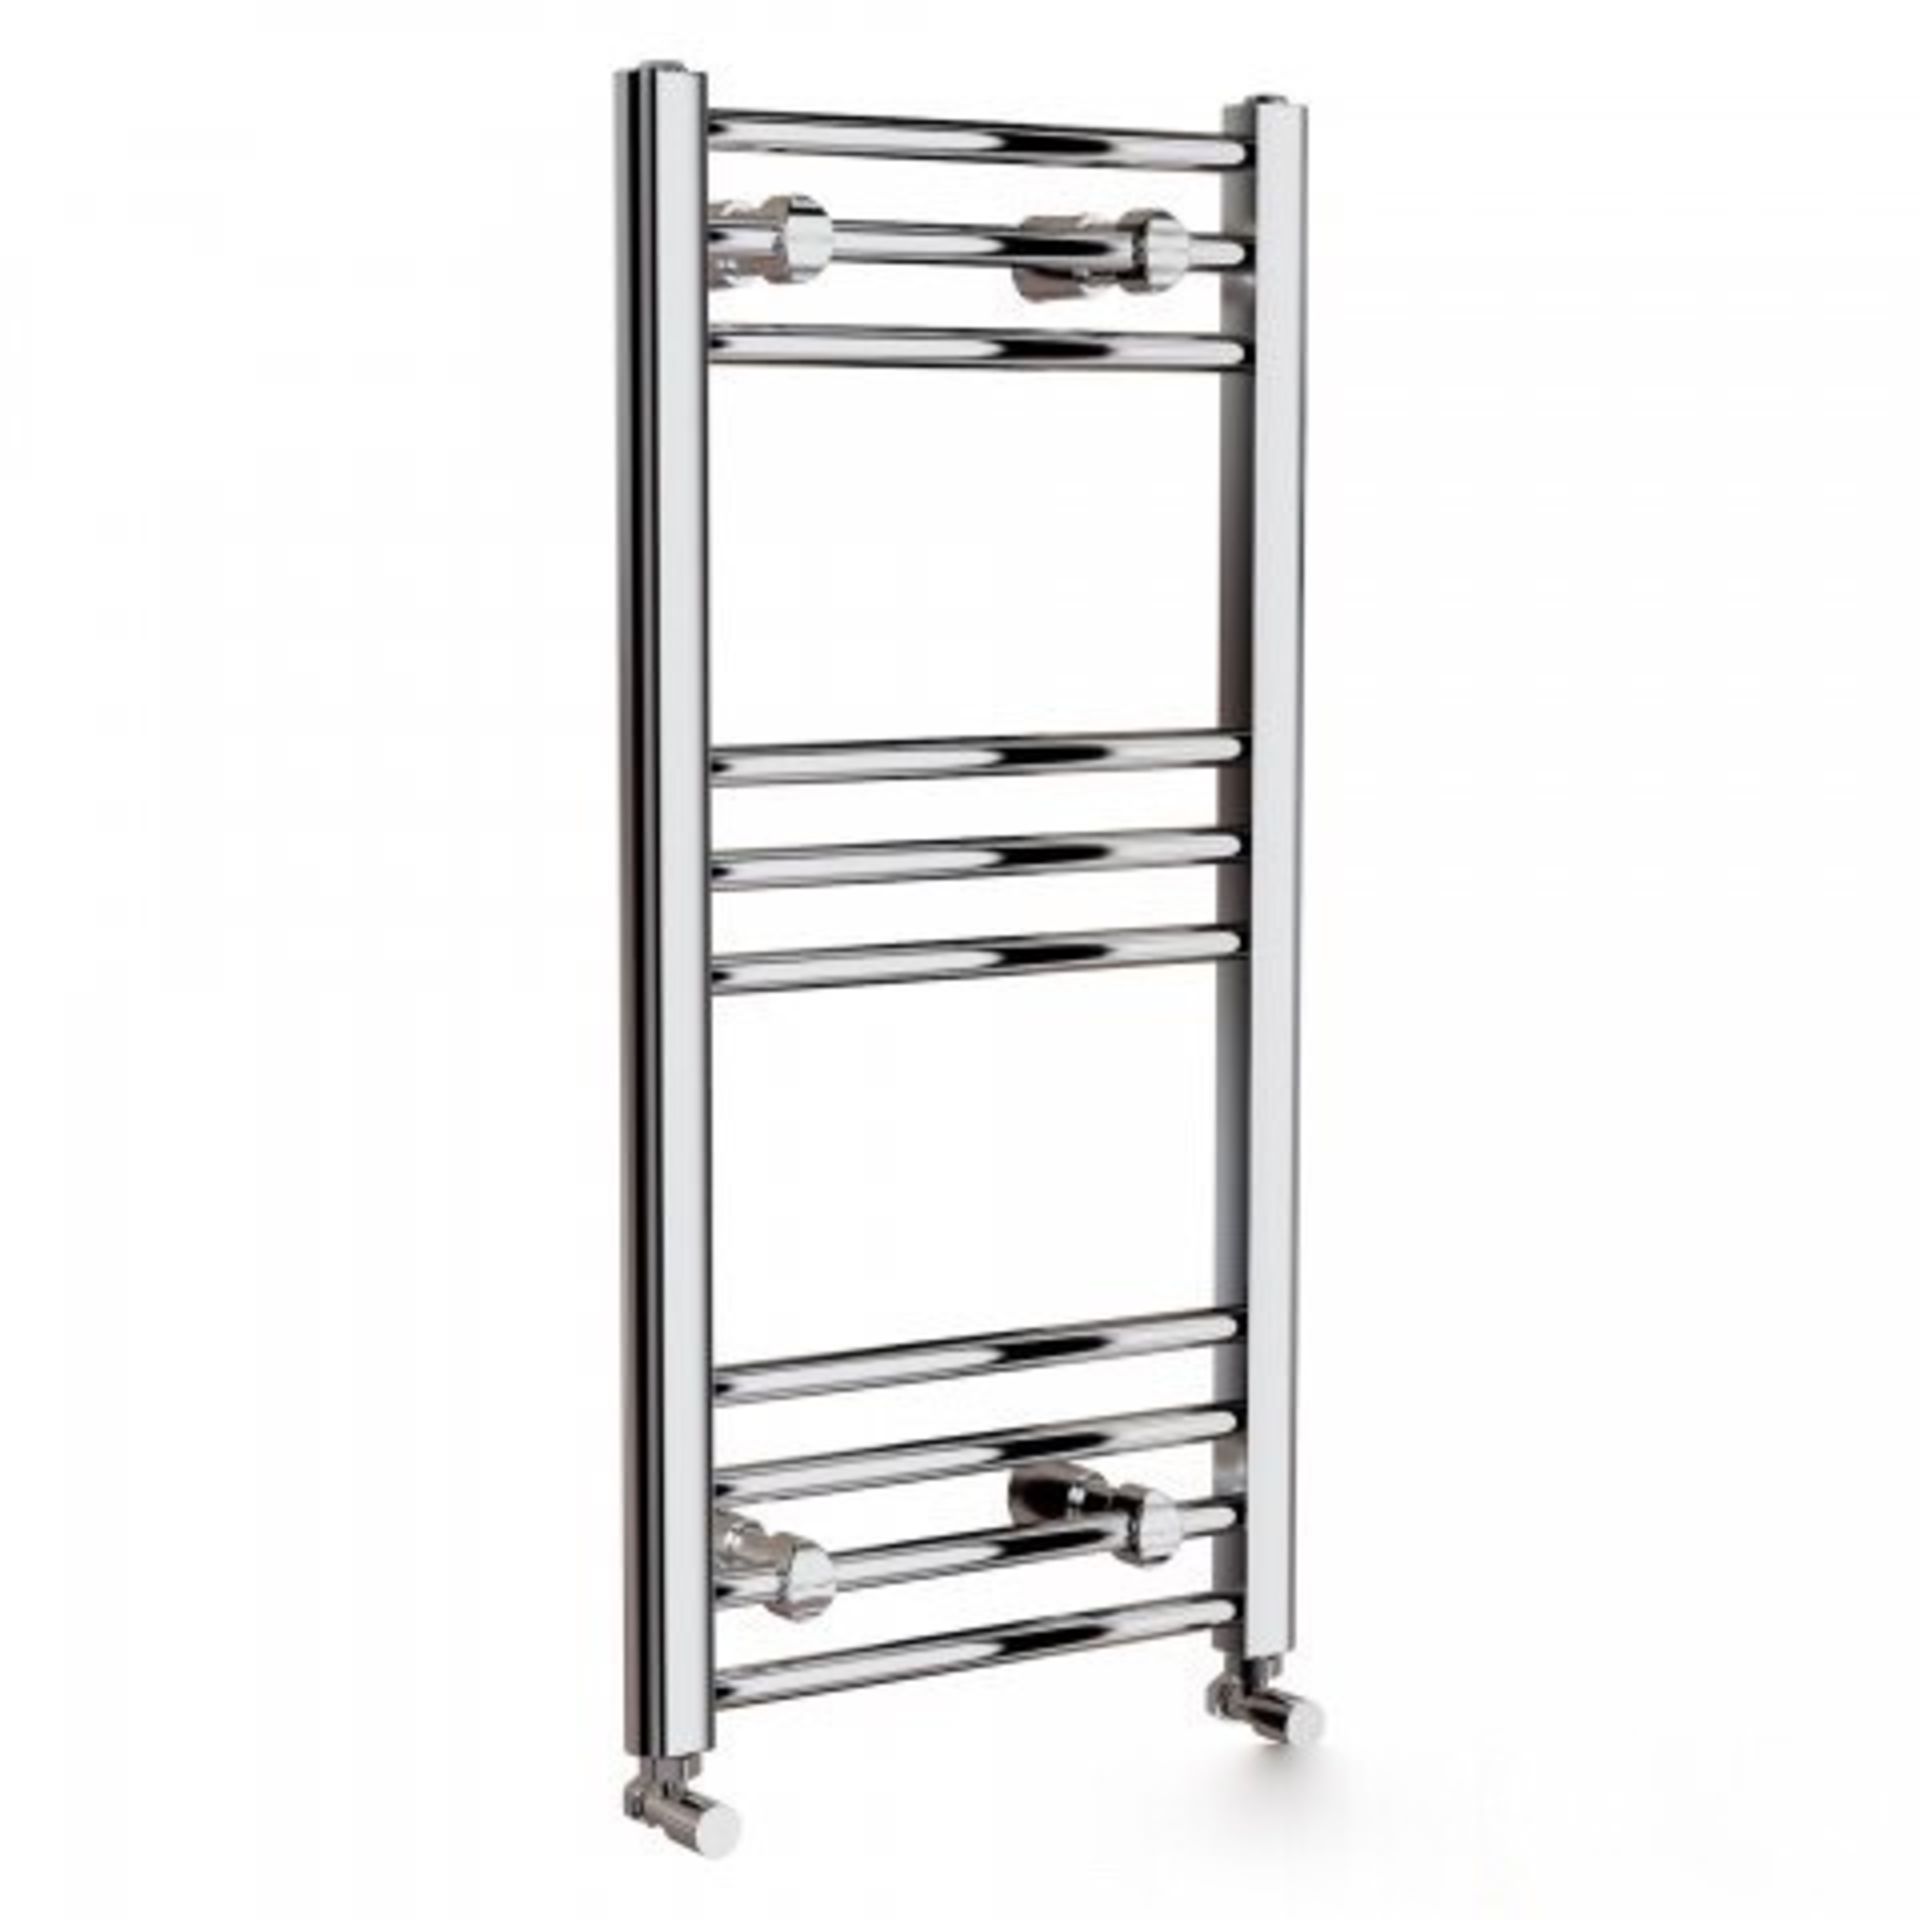 AA127- 1000x600mm White Straight Rail Ladder Towel Radiator - Polar Basic Offering durability and - Image 7 of 7